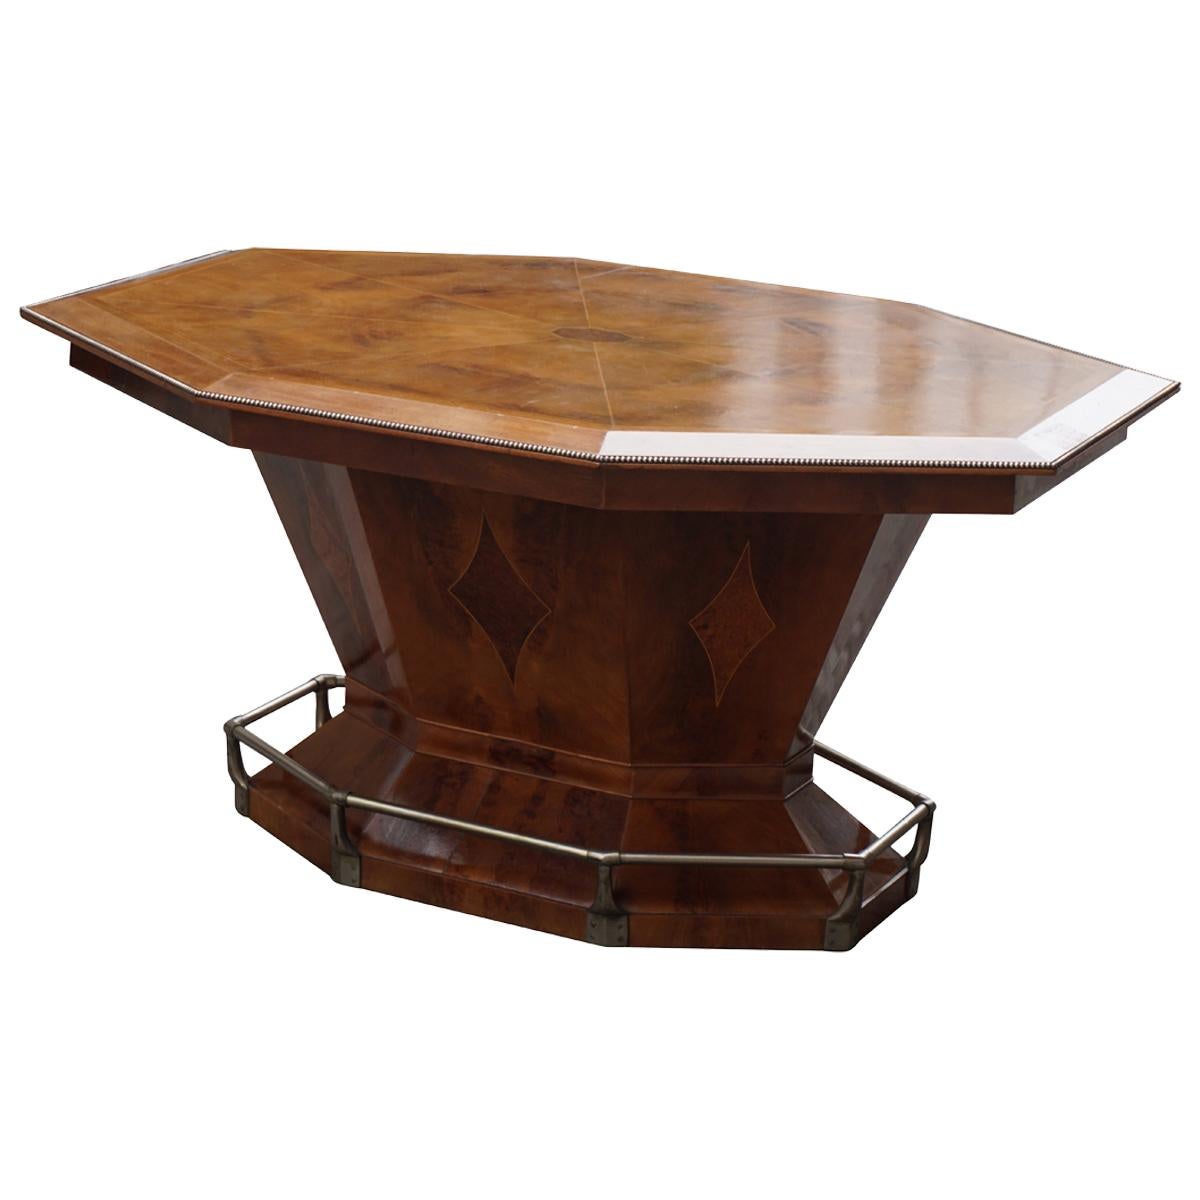 Rare Art Deco Dining or Conference Table in the Shape of an Octagonal Diamond For Sale